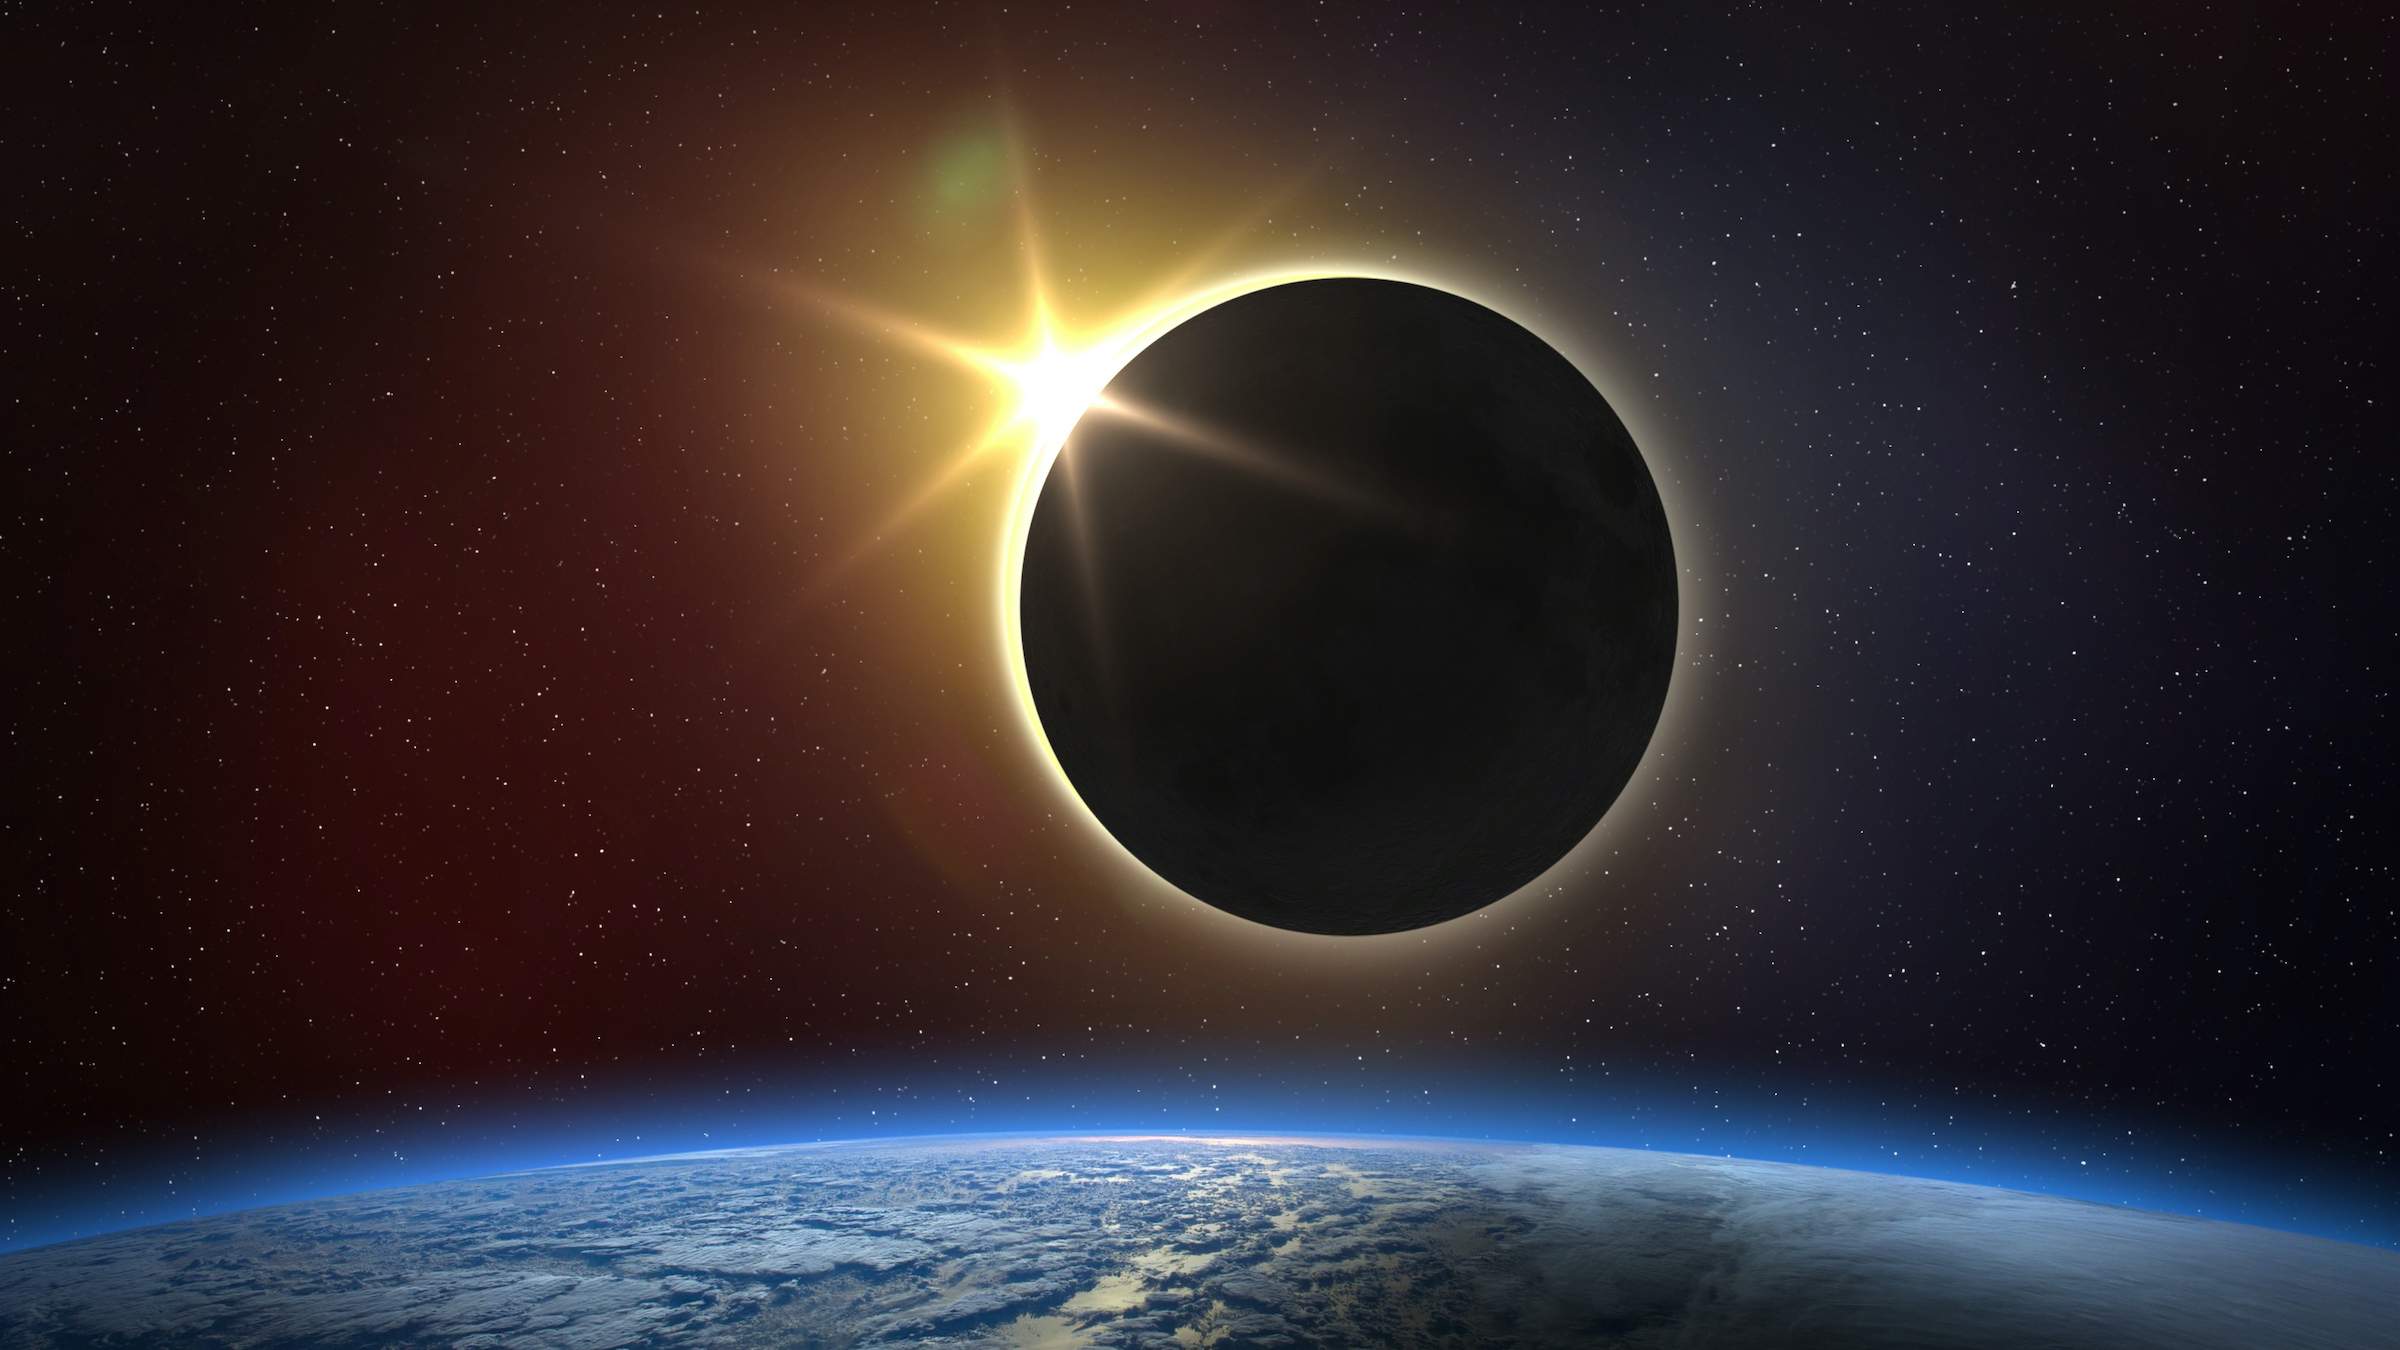 On April 8, 2024, the moon will completely block the sun for a few minutes in a total solar eclipse passing over North America.